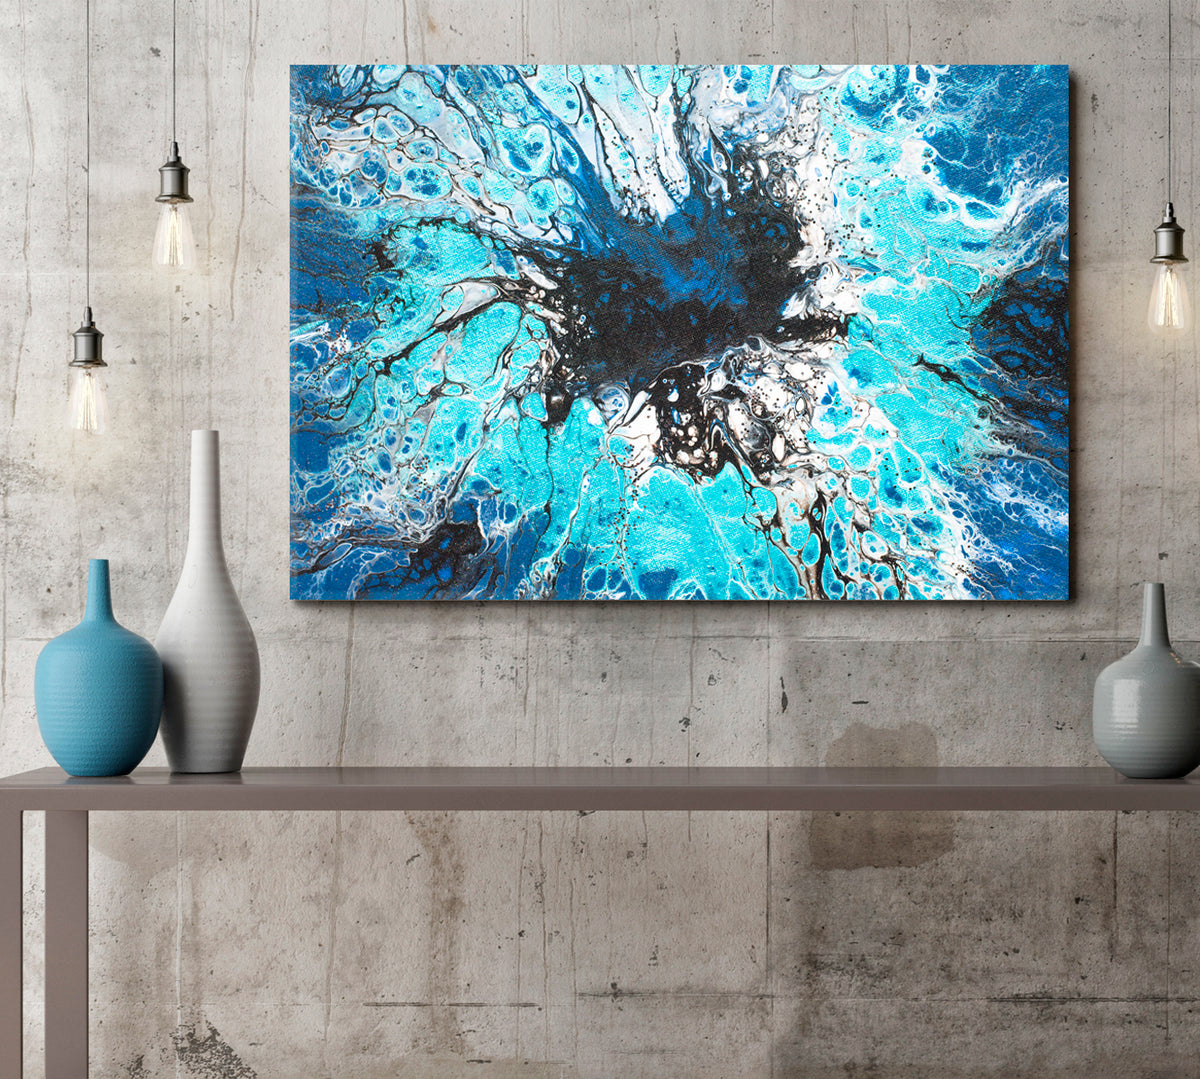 Vibrant Blue Turquoise Black Stains Abstract Geode Resin Painting Fluid Art, Oriental Marbling Canvas Print Artesty 1 panel 24" x 16" 